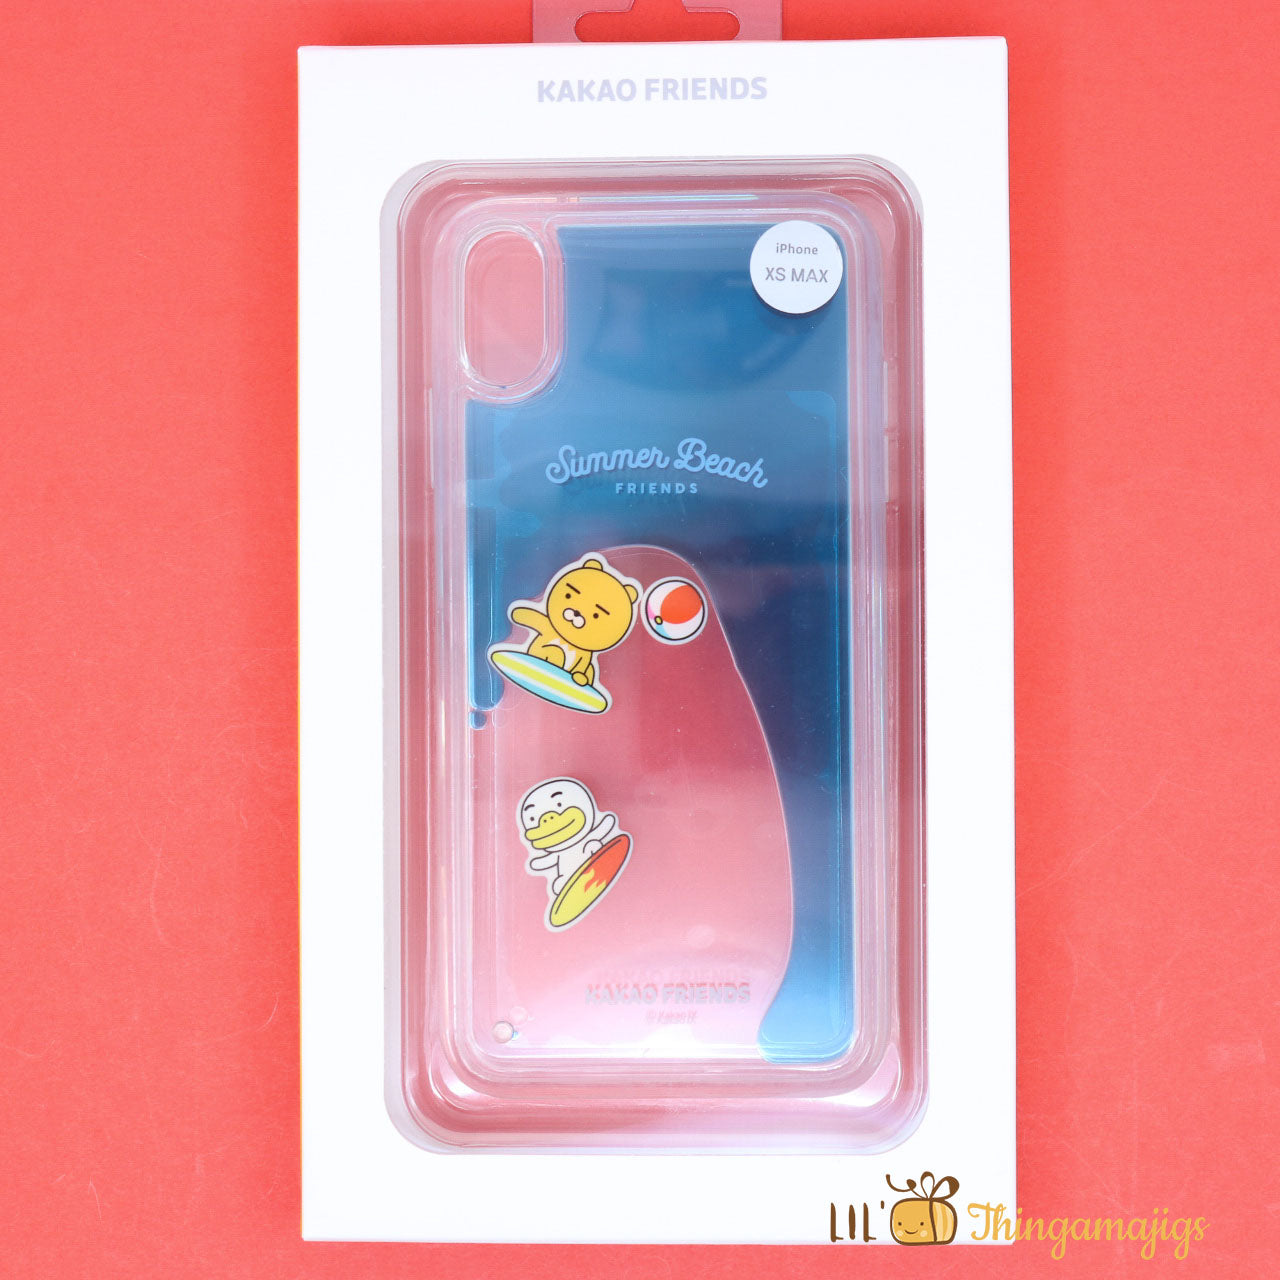 Kakao Friends iphone Xs Max Case (Surfing)